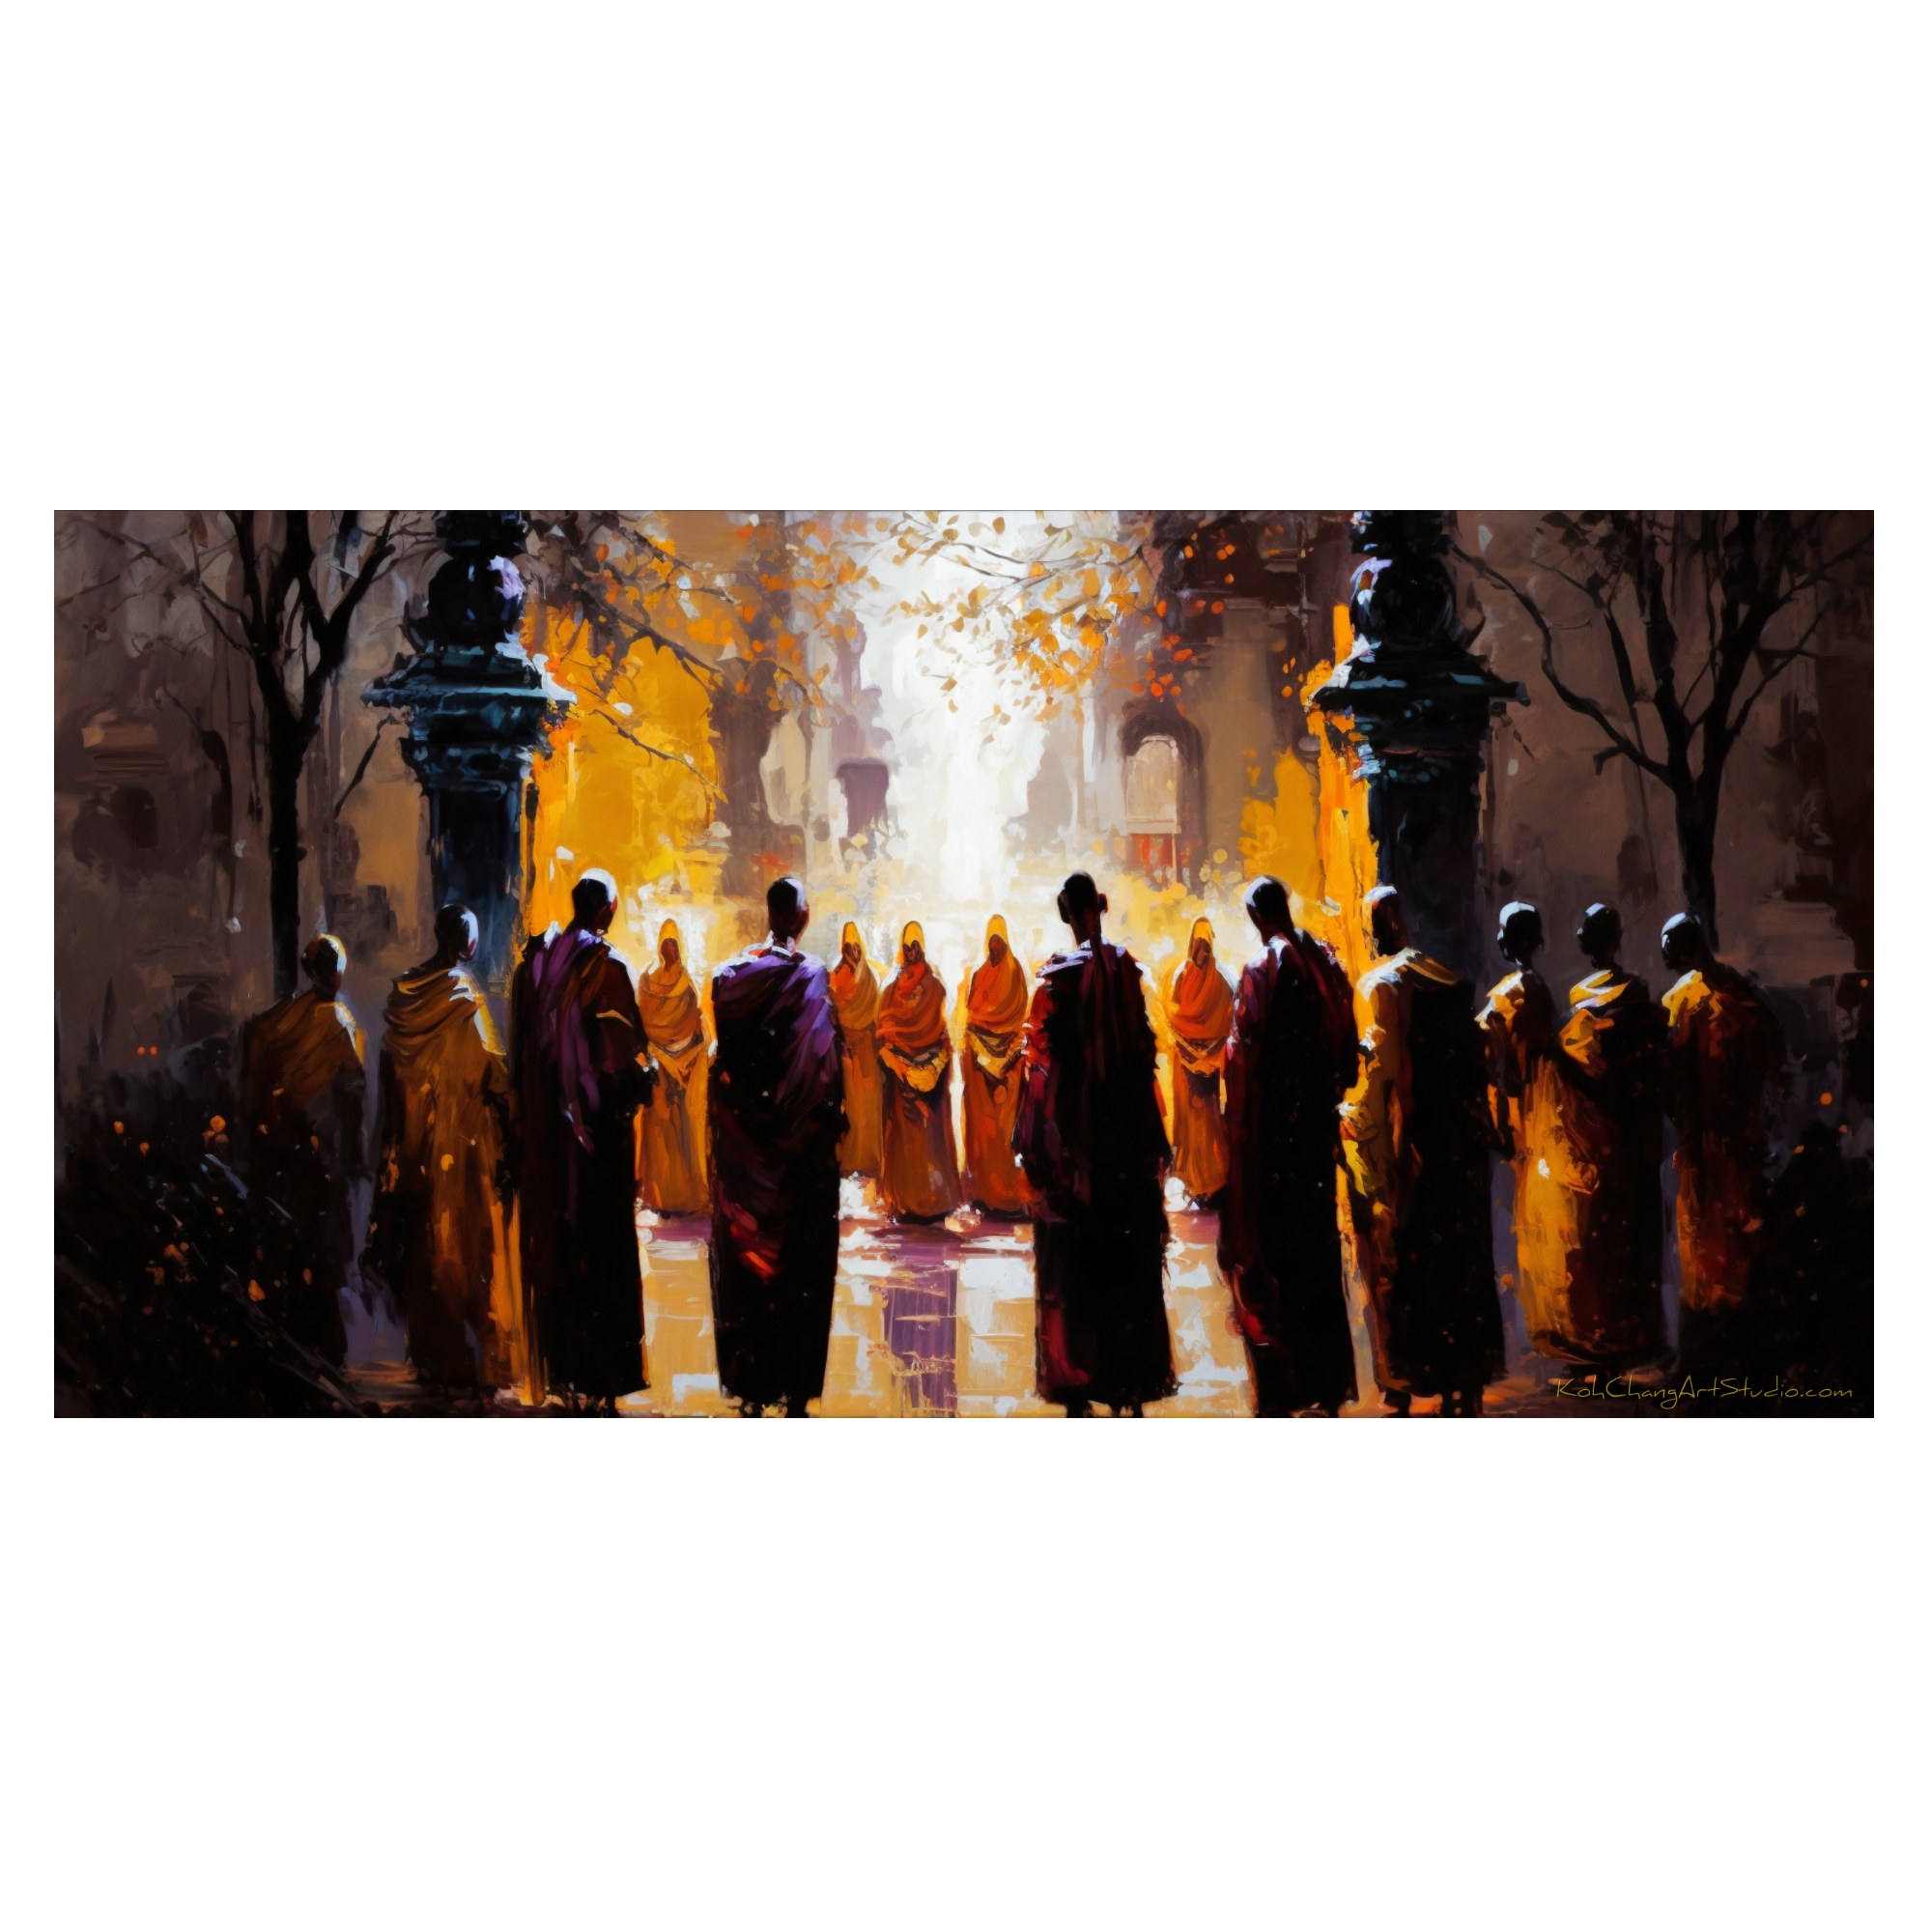 CHANTS AND CHAKRAS Image - Monks engulfed in reflections, capturing the essence of dedication.